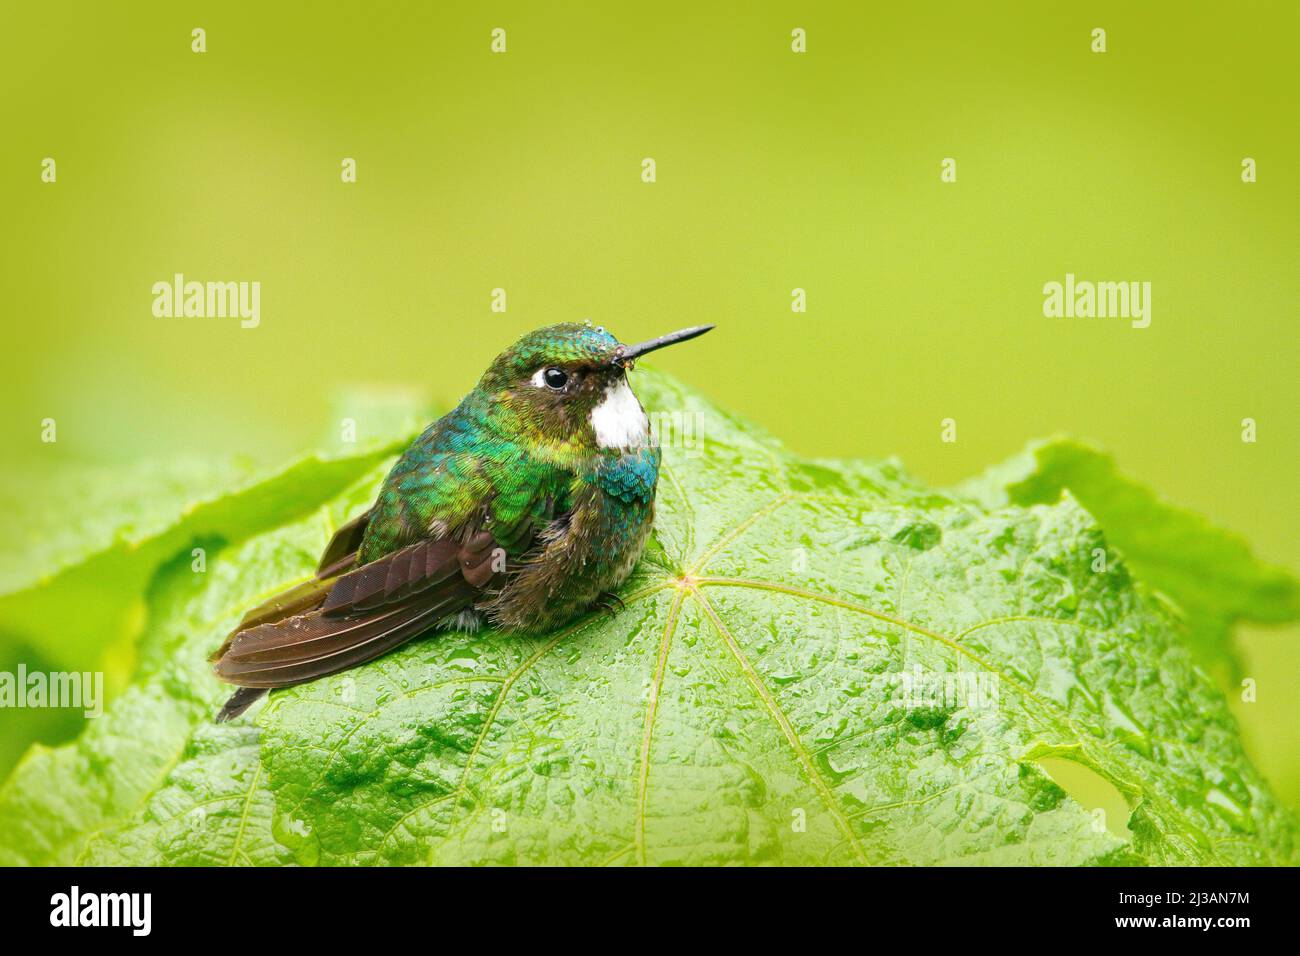 Cute bird sitting on the green leave, small bird in the green leaves, animal in the nature habitat, mountain tropic forest, wildlife, Costa Rica. Stock Photo